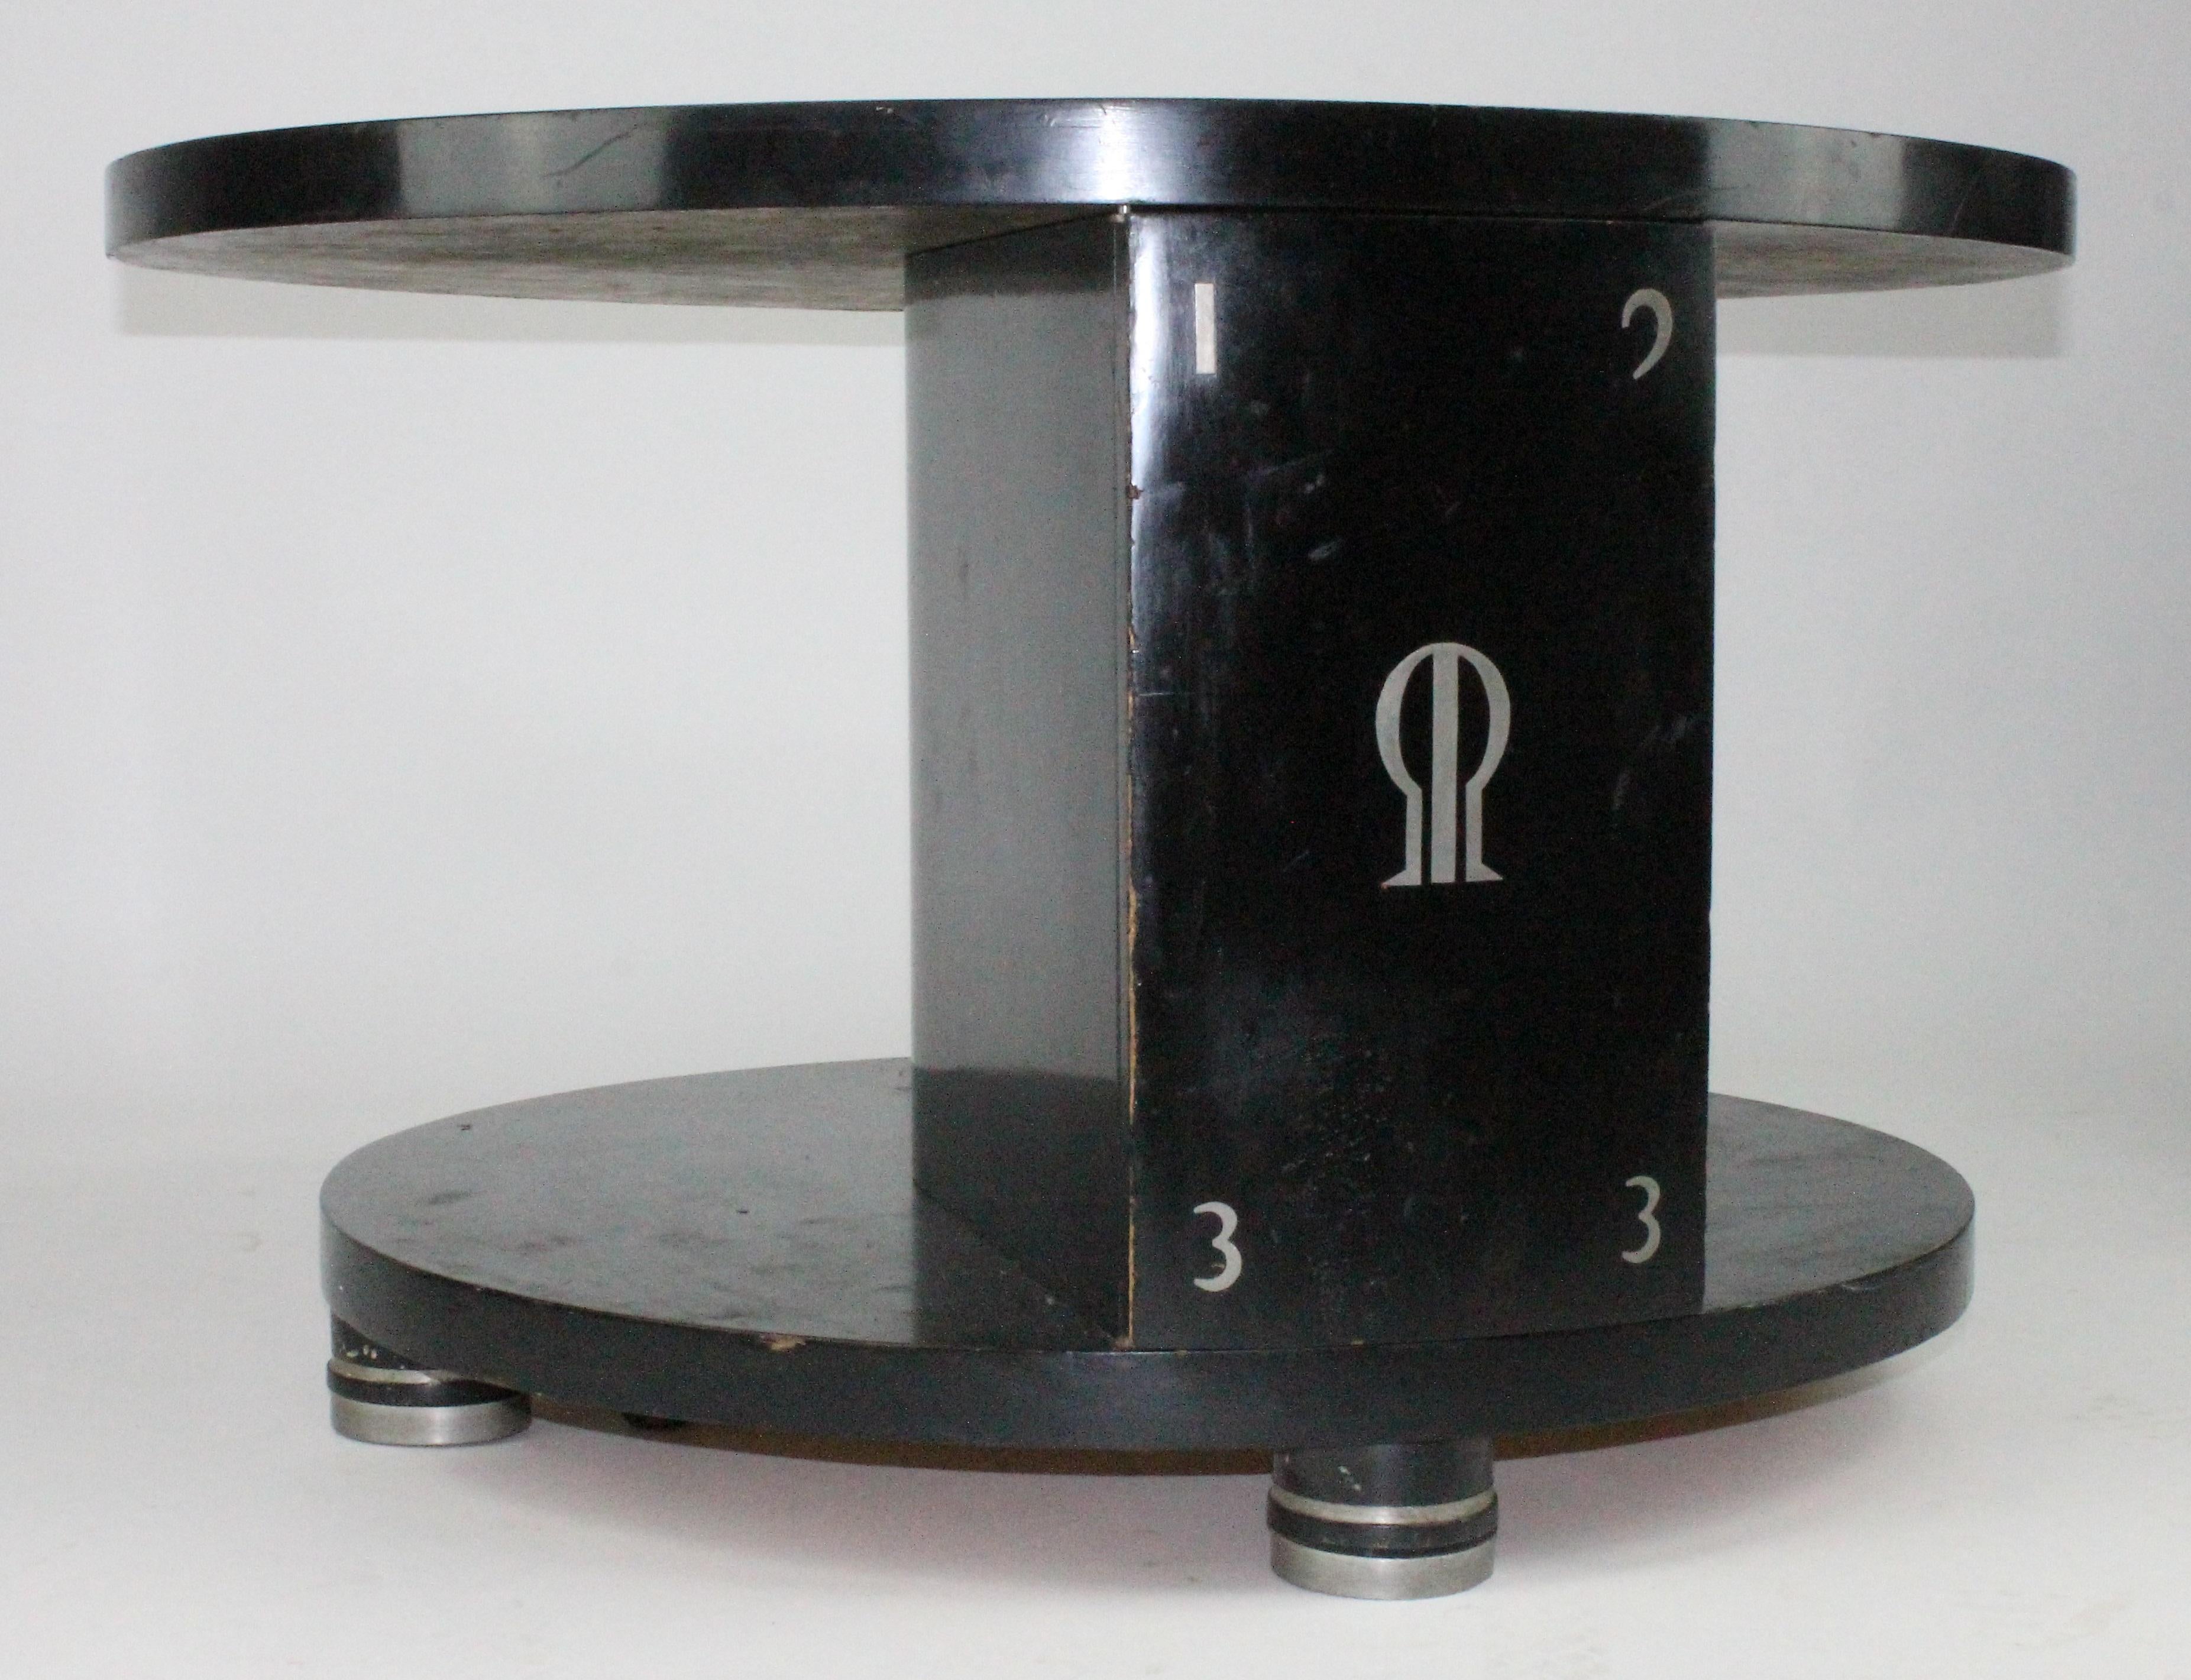 Alvar Andersson Table, 1933, Swedish, Black Painted with Pewter Inlays (Art déco)